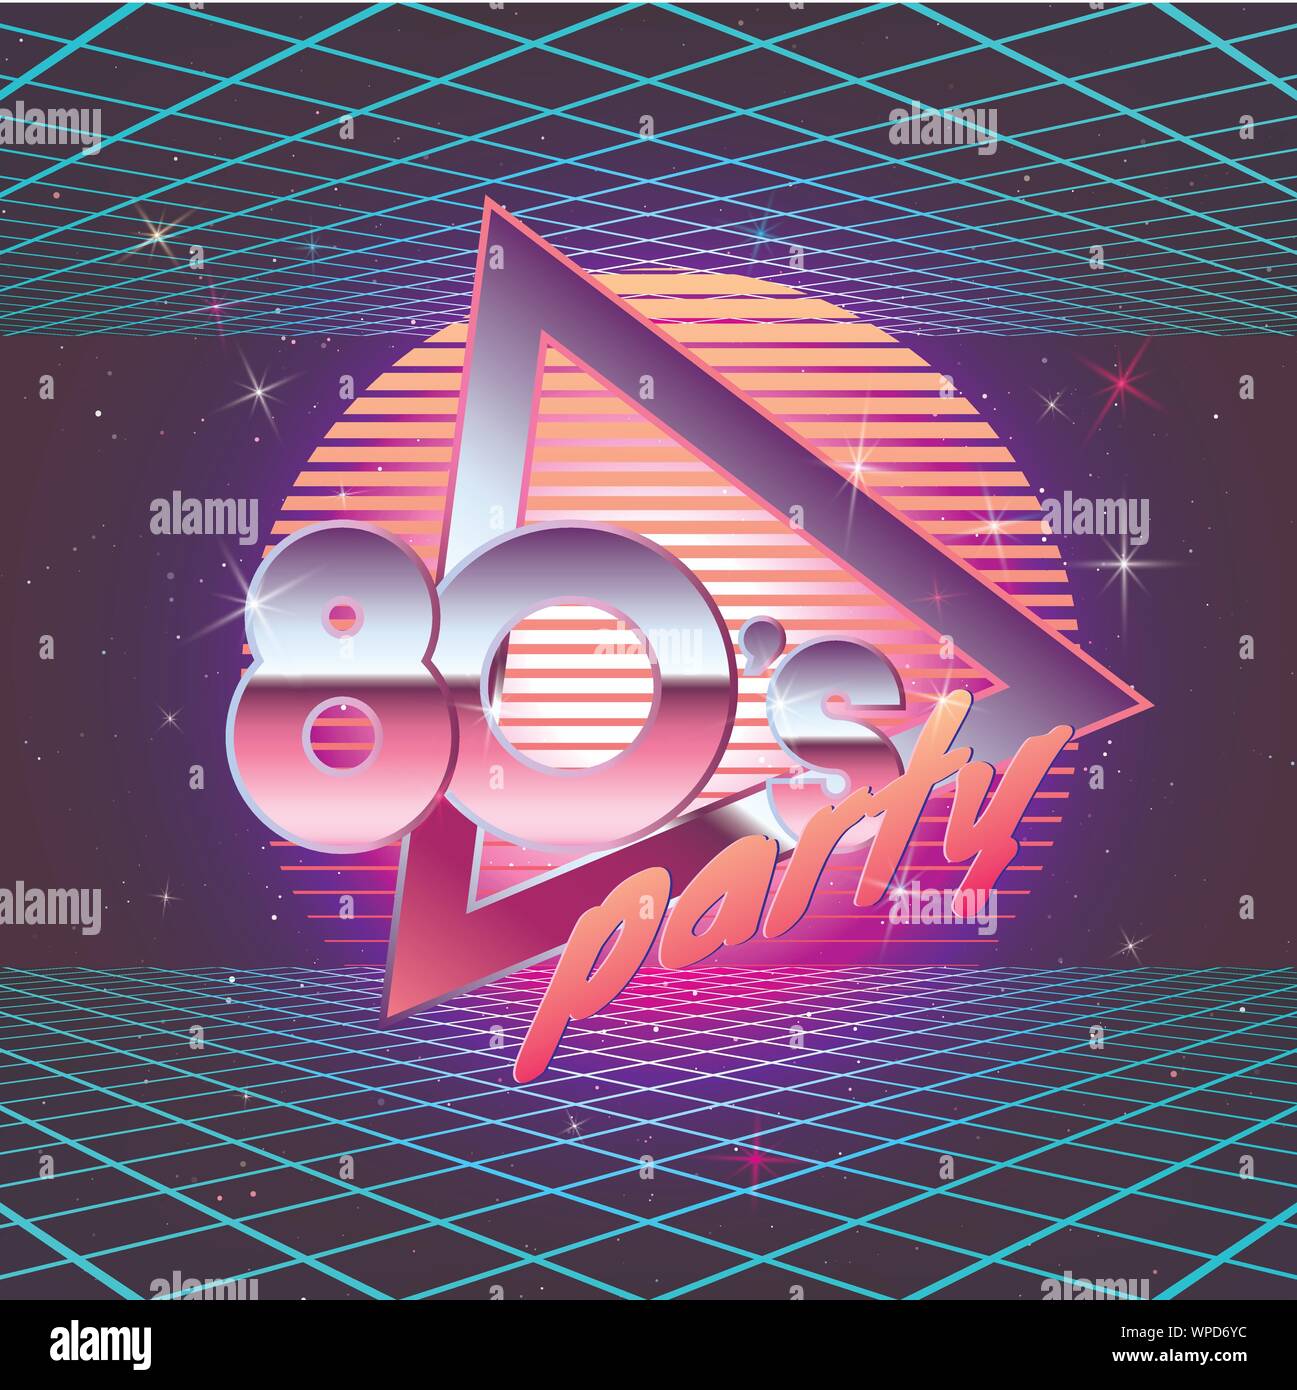 Paster template for retro party 80s with laser rays. Neon colors. Vintage electronic music flyer. Vector illustration Stock Vector